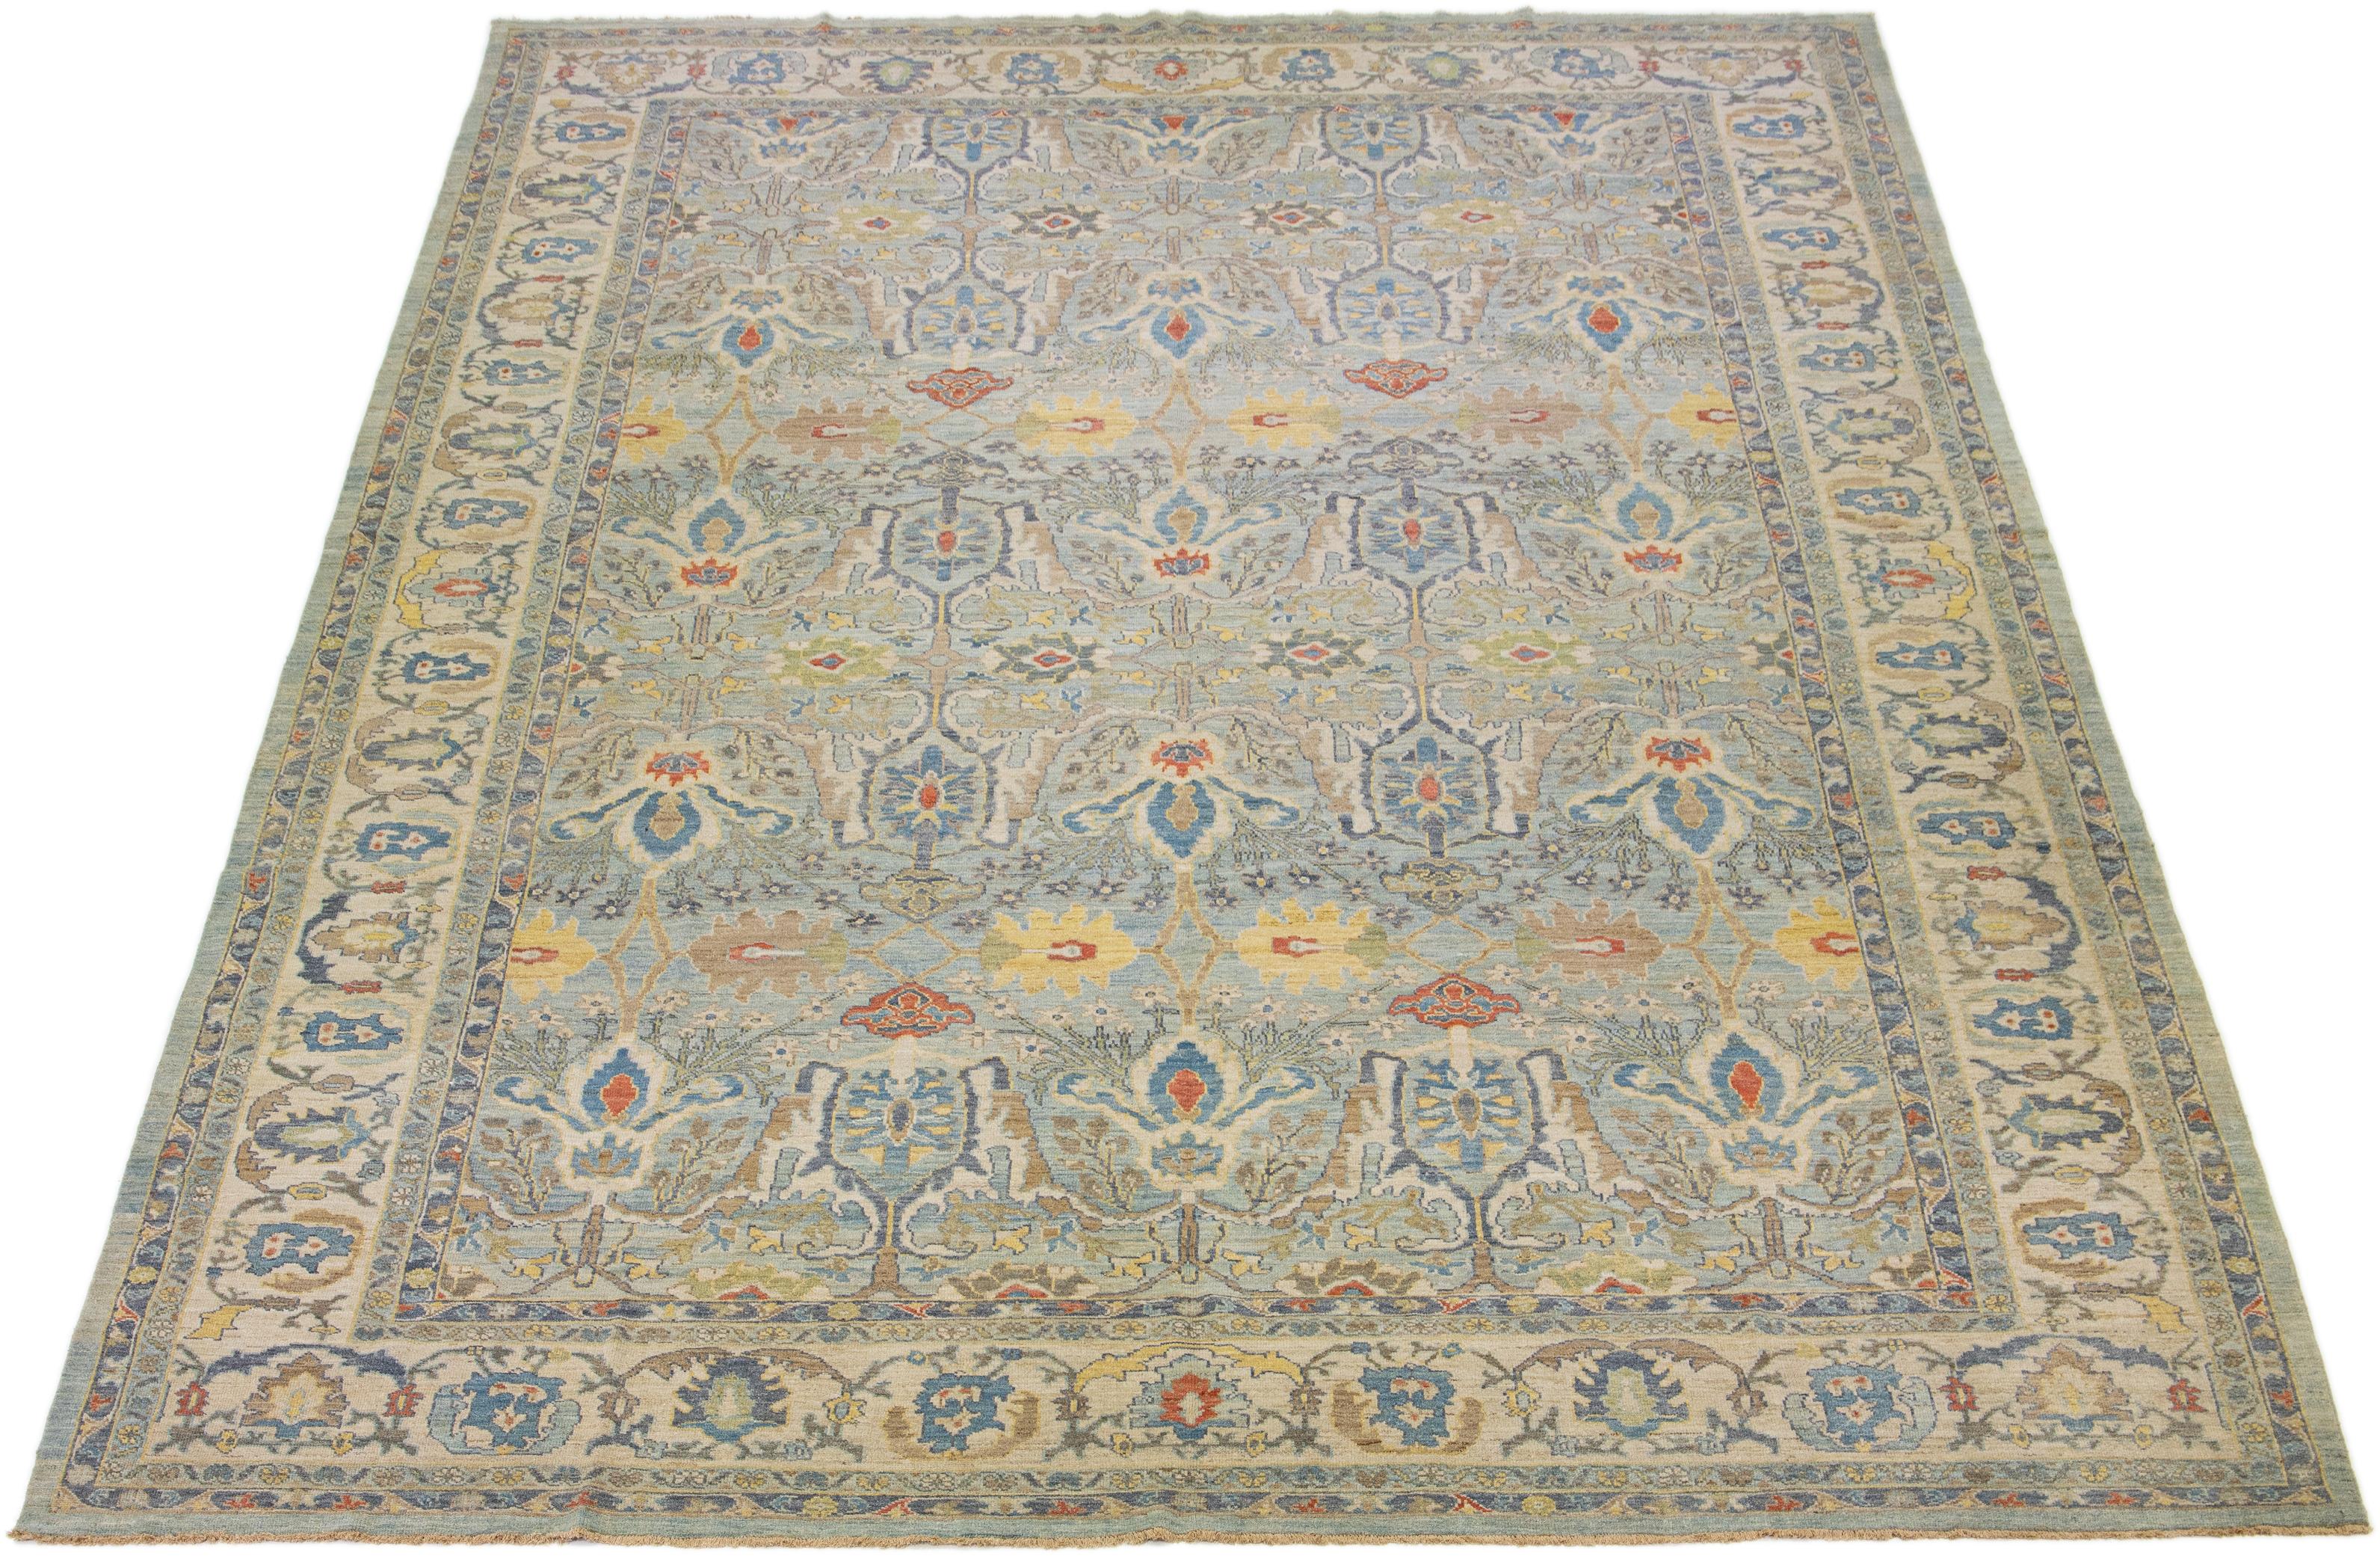 This modern reinterpretation of timeless Sultanabad design is beautifully manifested in an exquisitely hand knotted wool rug, resplendent in its striking light blue shade. An intricate beige border delineates its all-over floral embroidery,